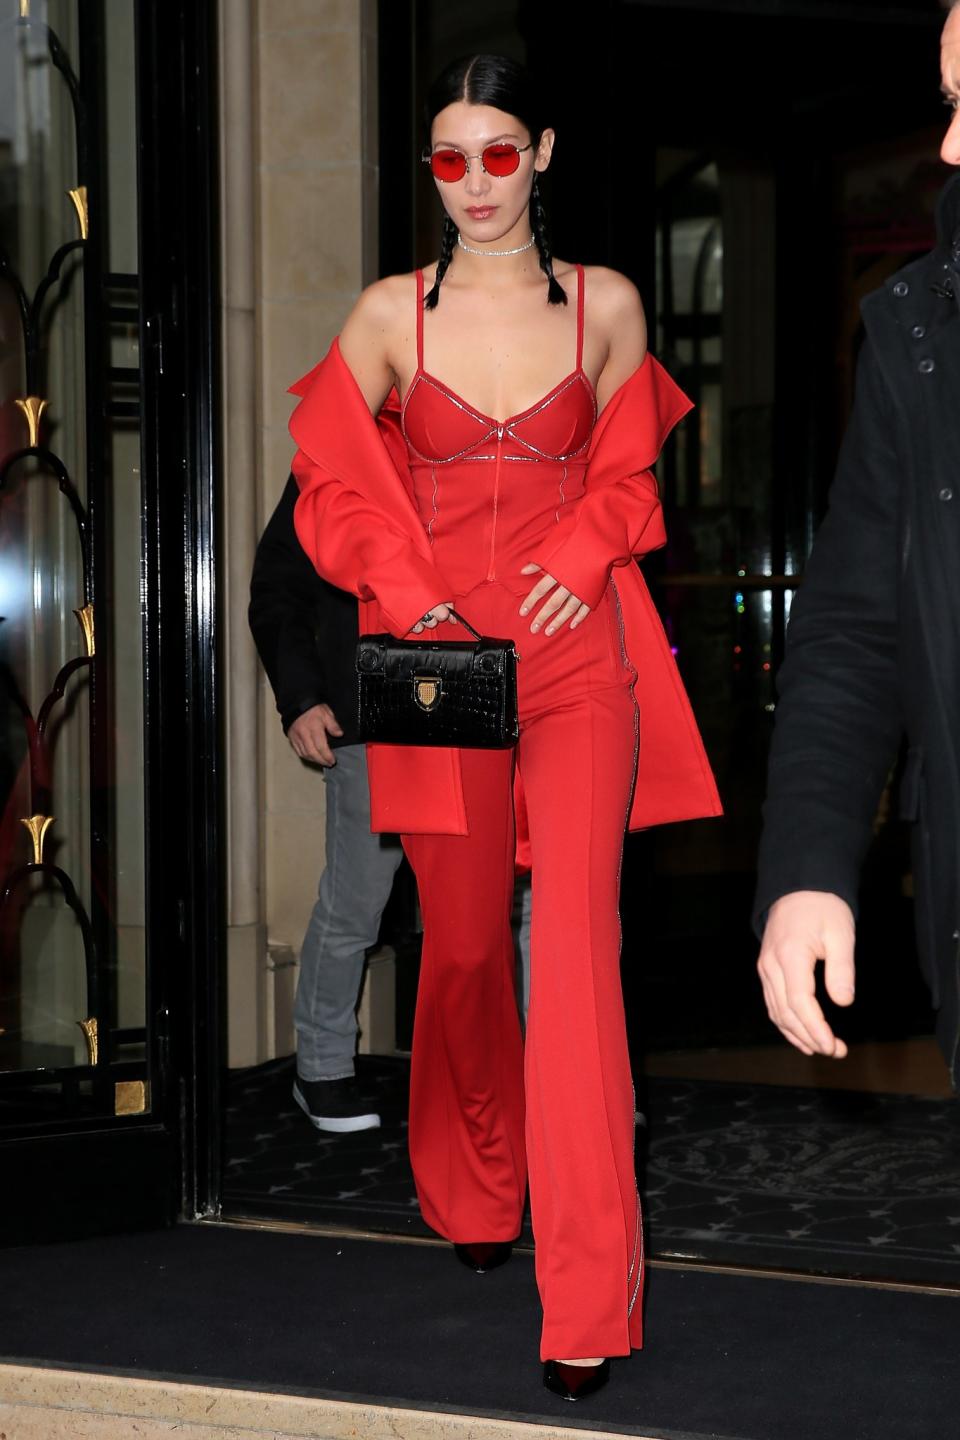 We need to talk about Bella Hadid’s Paris style